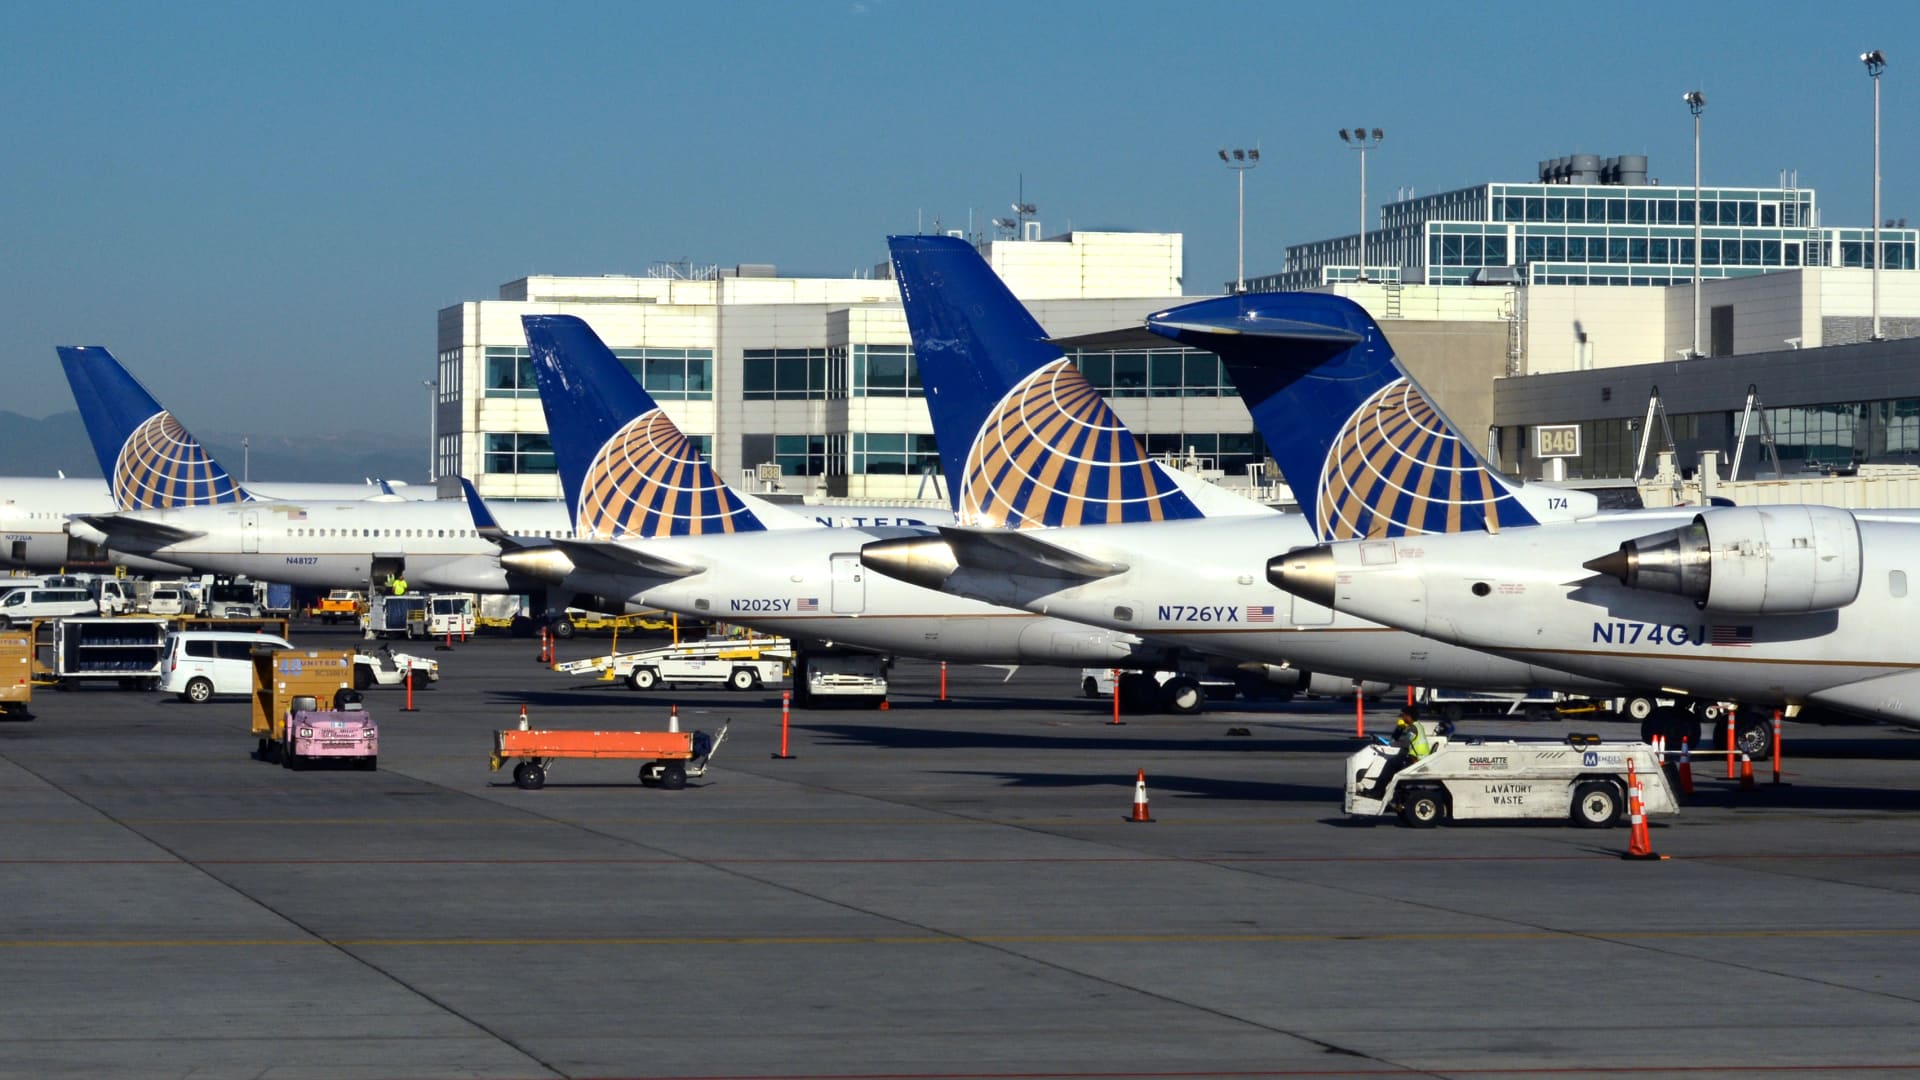 United Airlines expands in Denver, adding flights and lounges